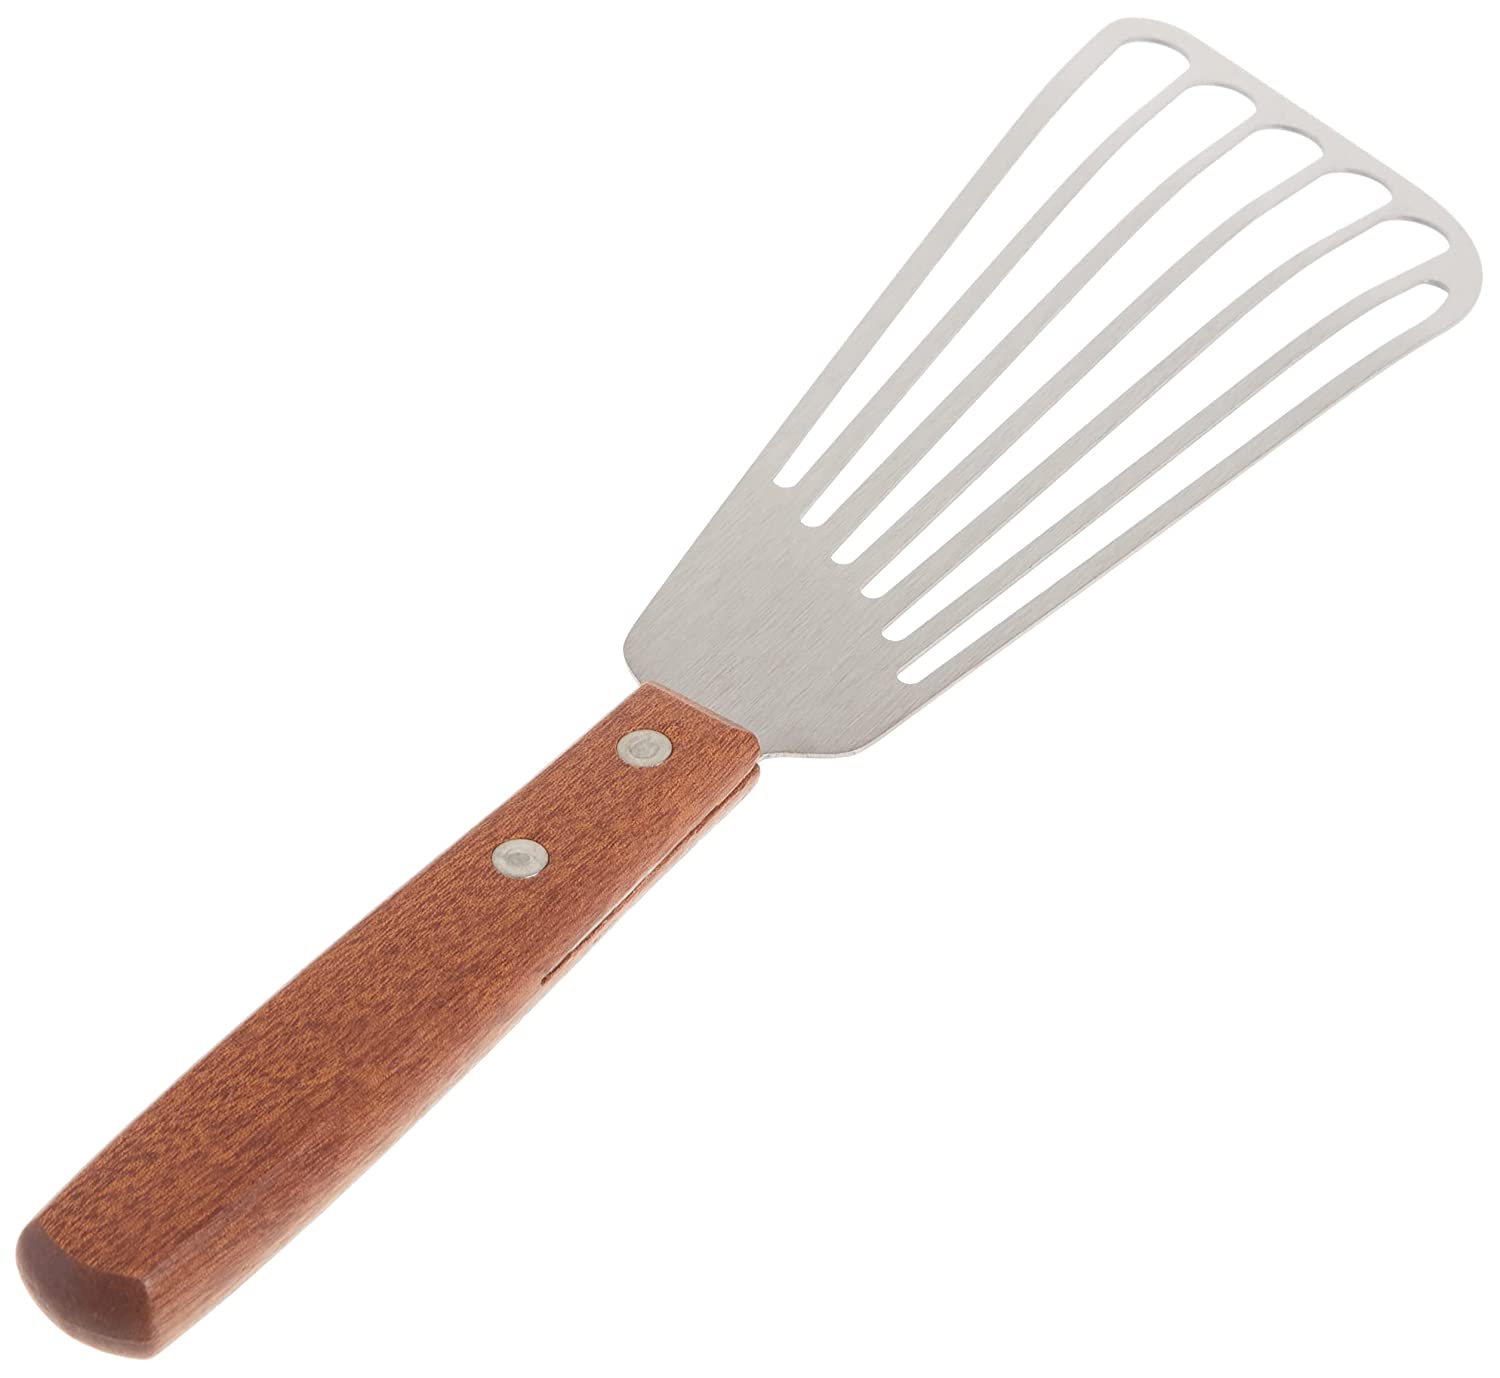 Review of the Best Spatulas for You